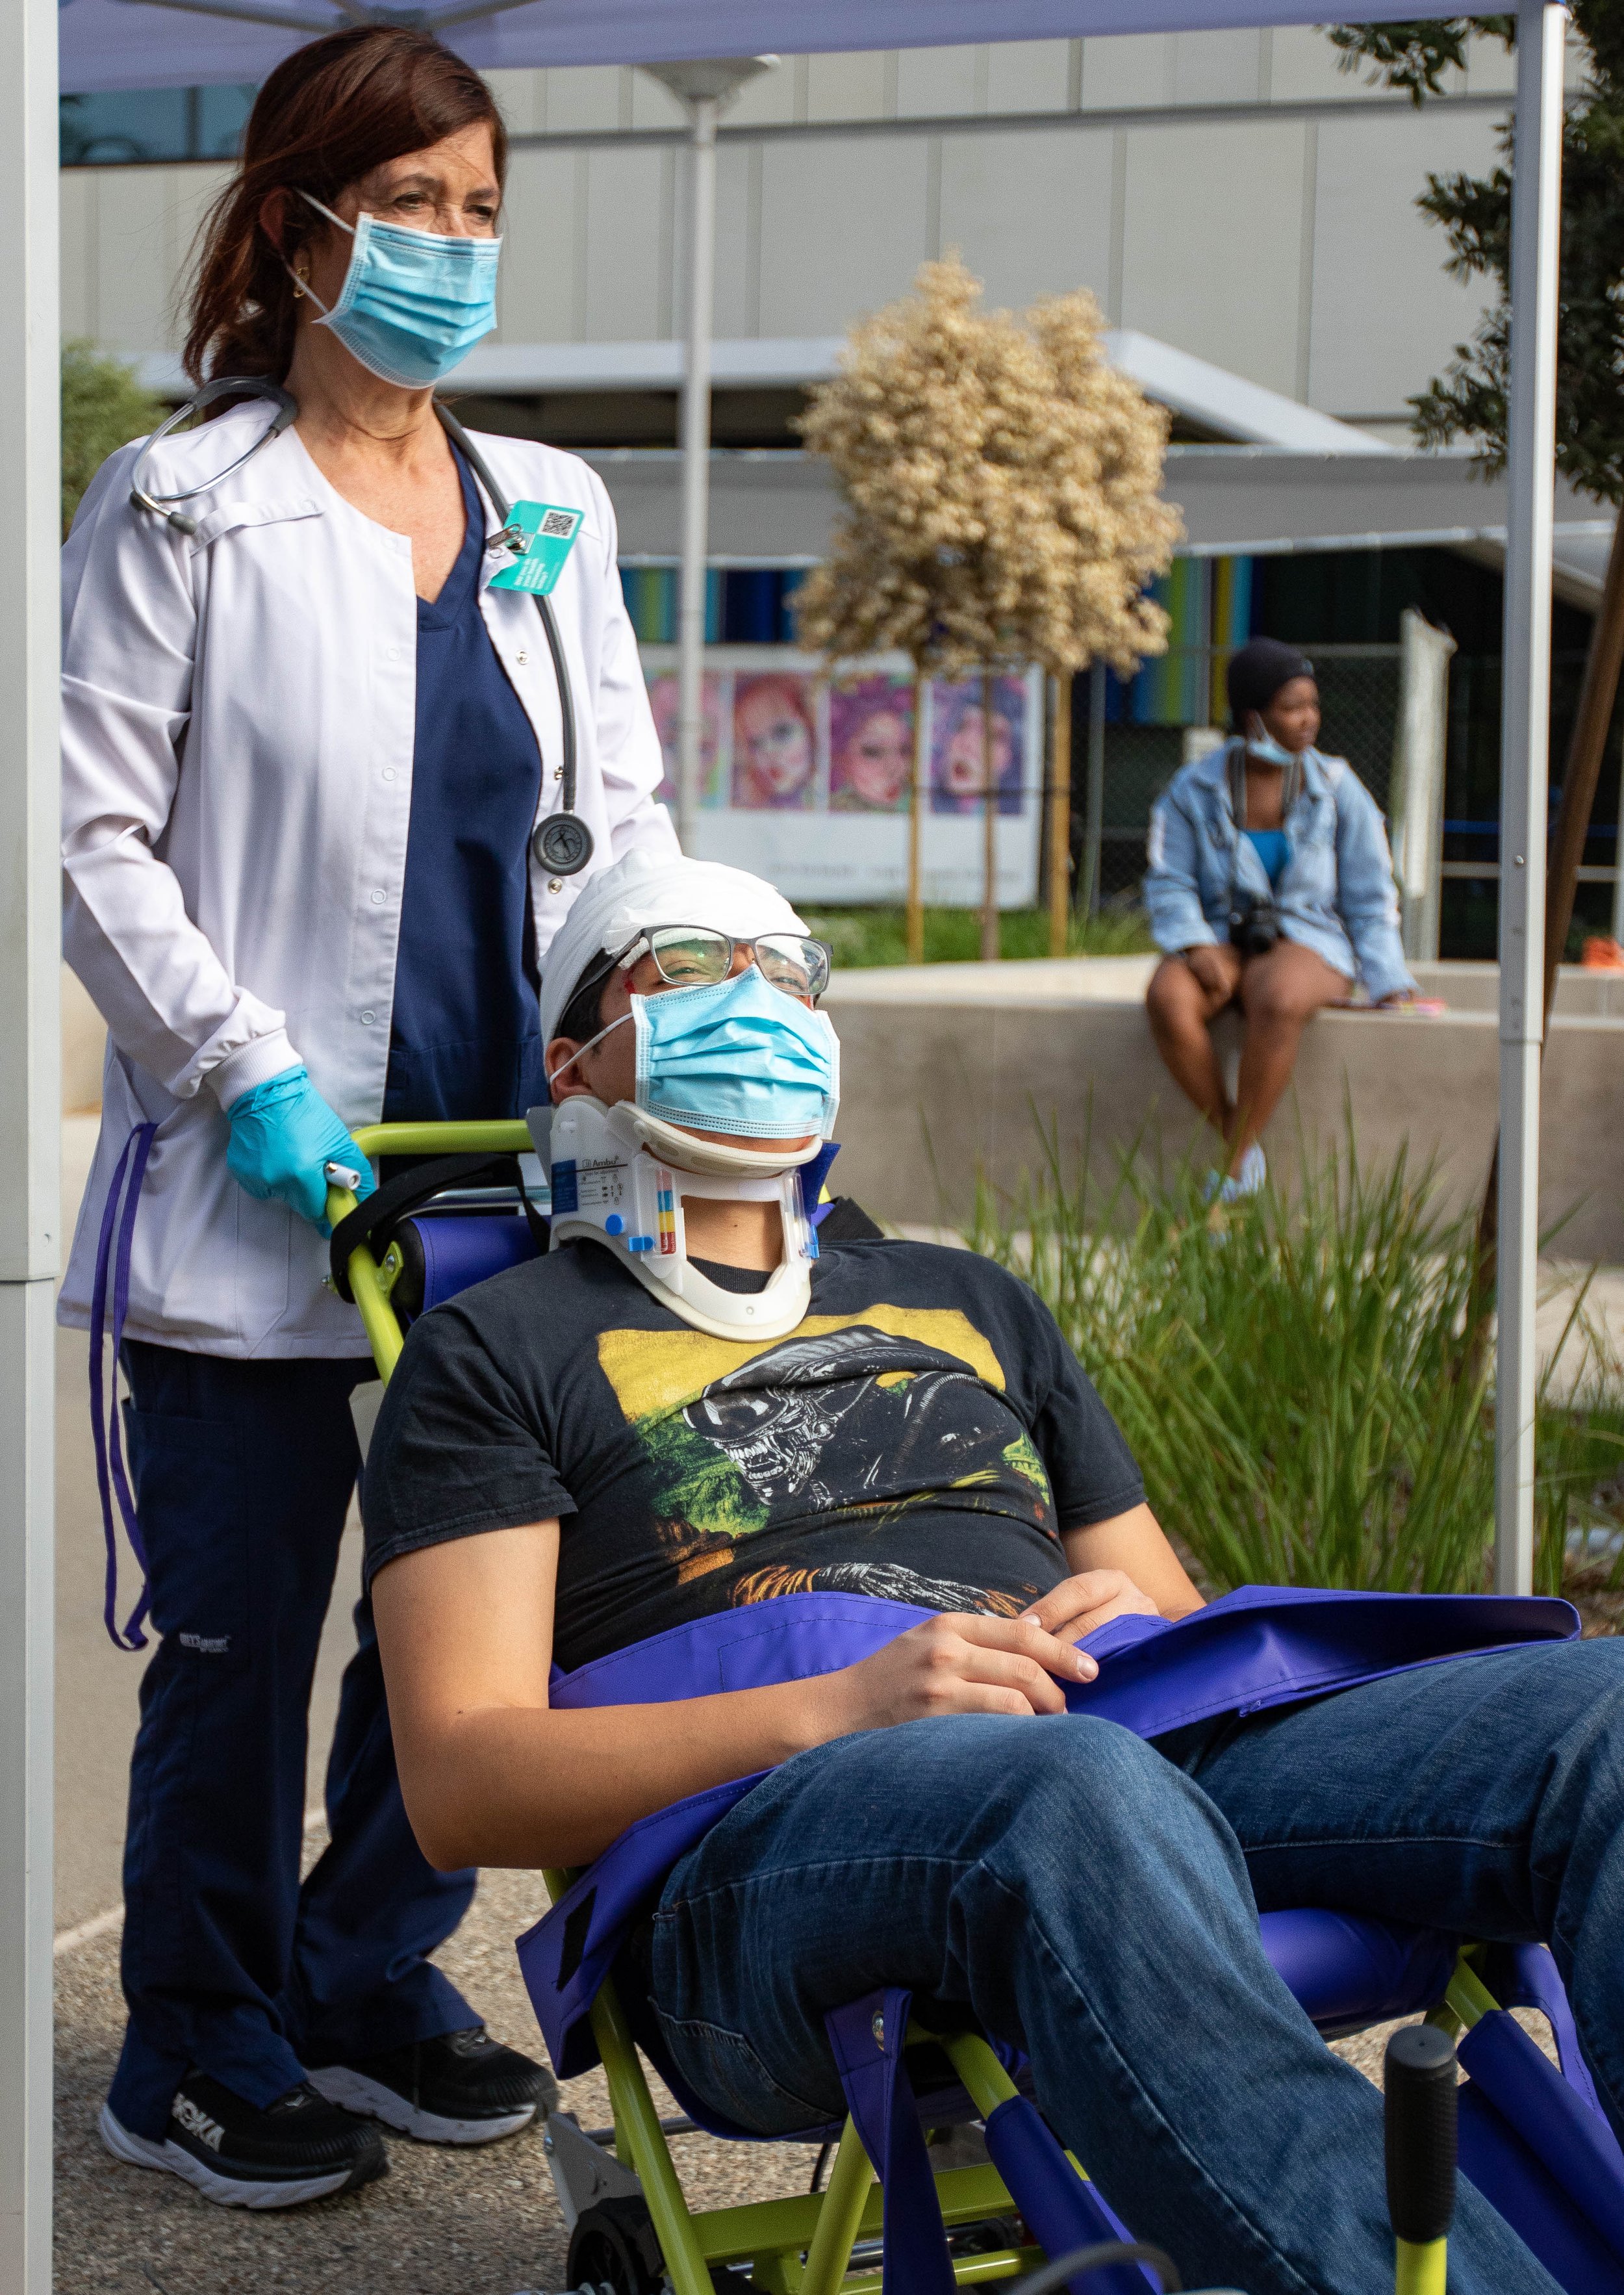  Santa Monica College (SMC) student Daniel Torres sits outside the SMC Student Services Center after participating as a simulated injured drill participant for the 2022 Great ShakeOut SoCal Earthquake Drill and Media Event, hosted by SMC on Oct. 20, 